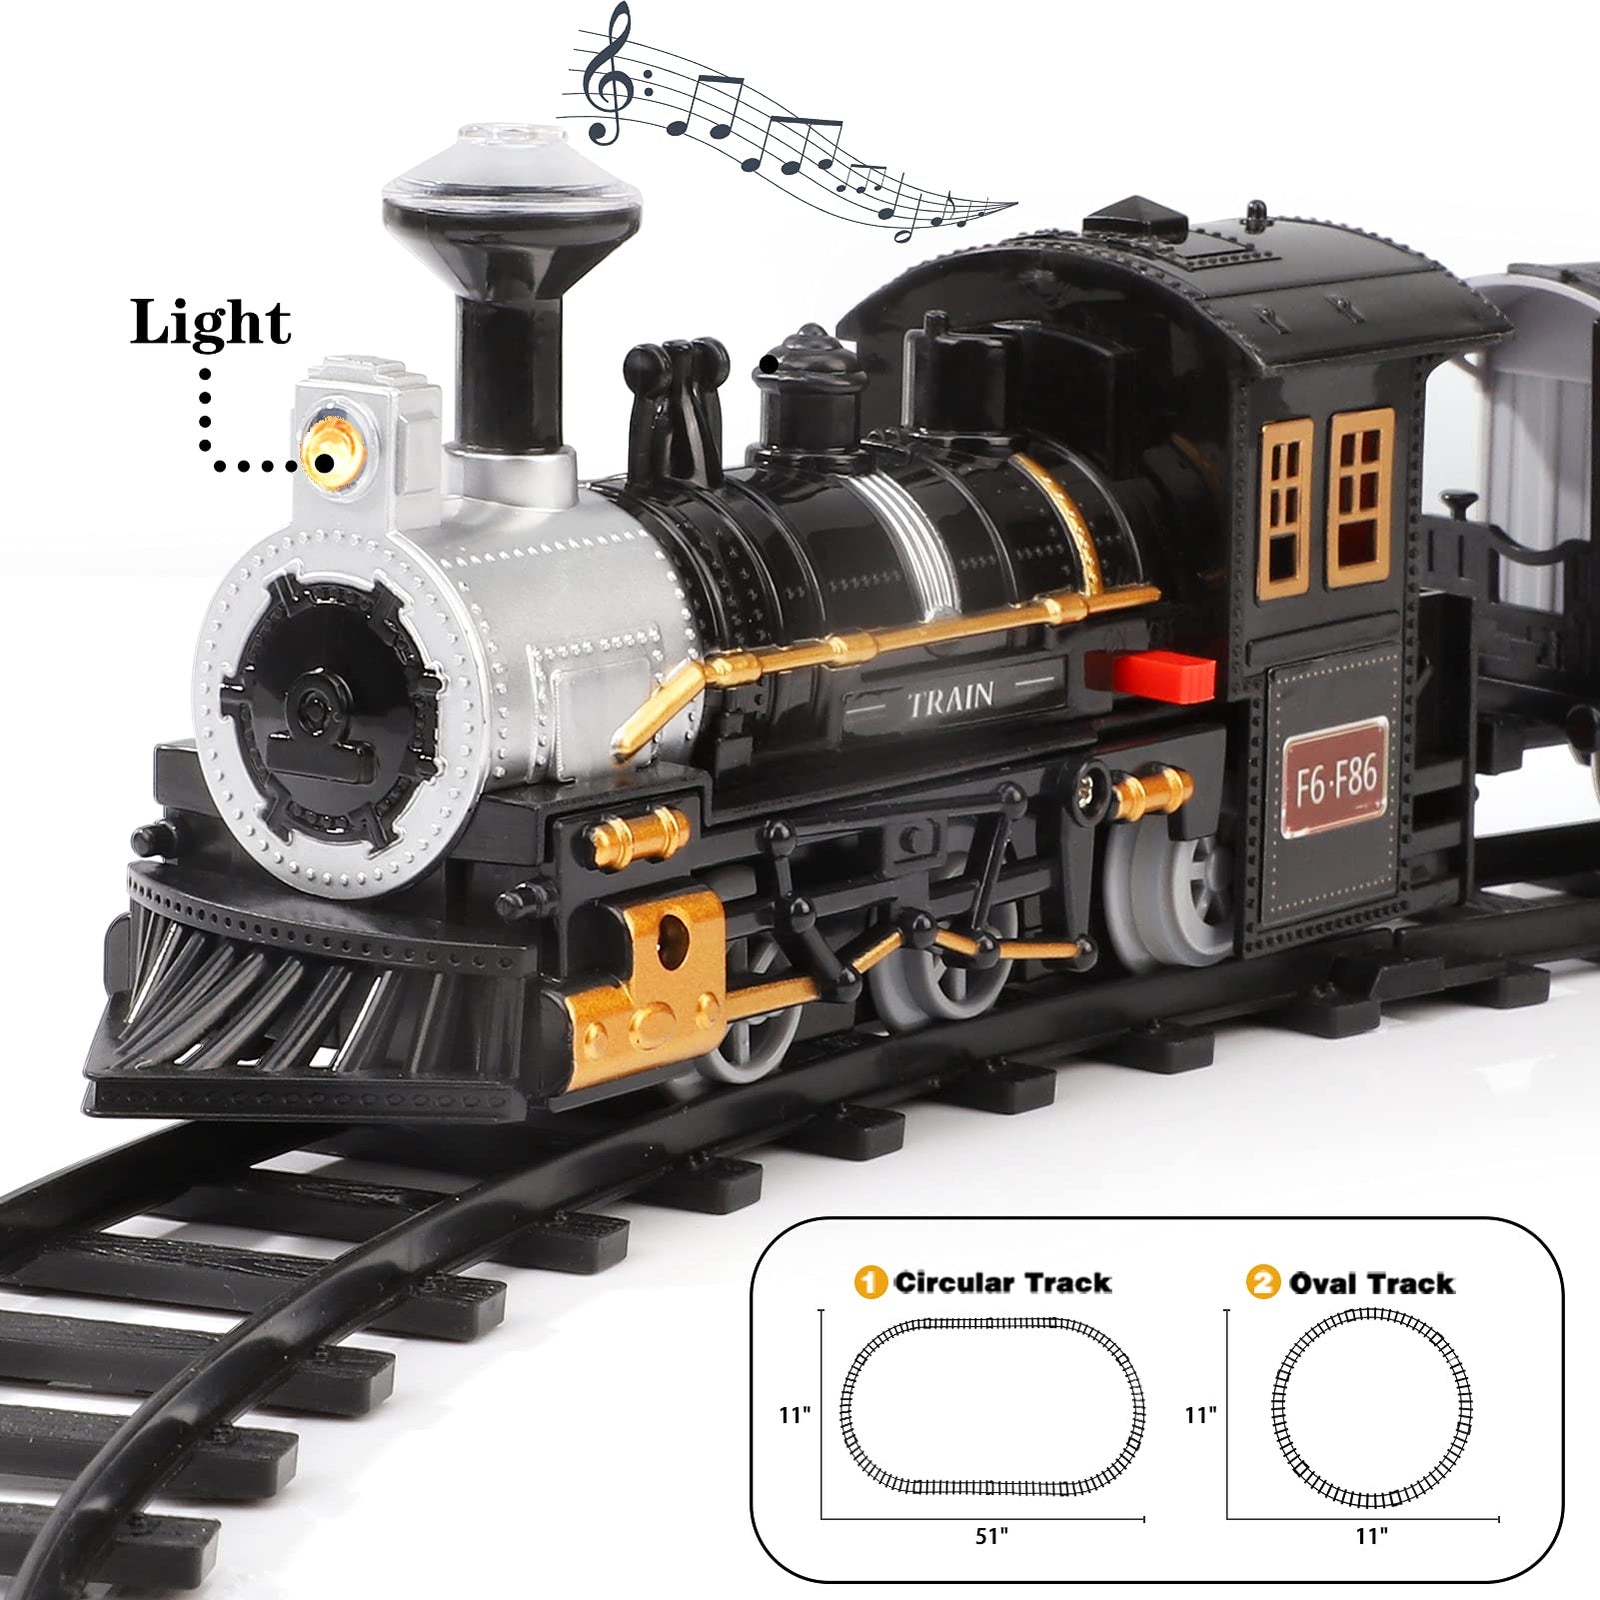 Lucky Doug Electric Train Set for Kids, Battery-Powered Christmas Train Set with Sounds Include 4 Cars and 10 Tracks, Classic Toy Train Set Gifts for 3 4 5 6 Years Old Boys Girls